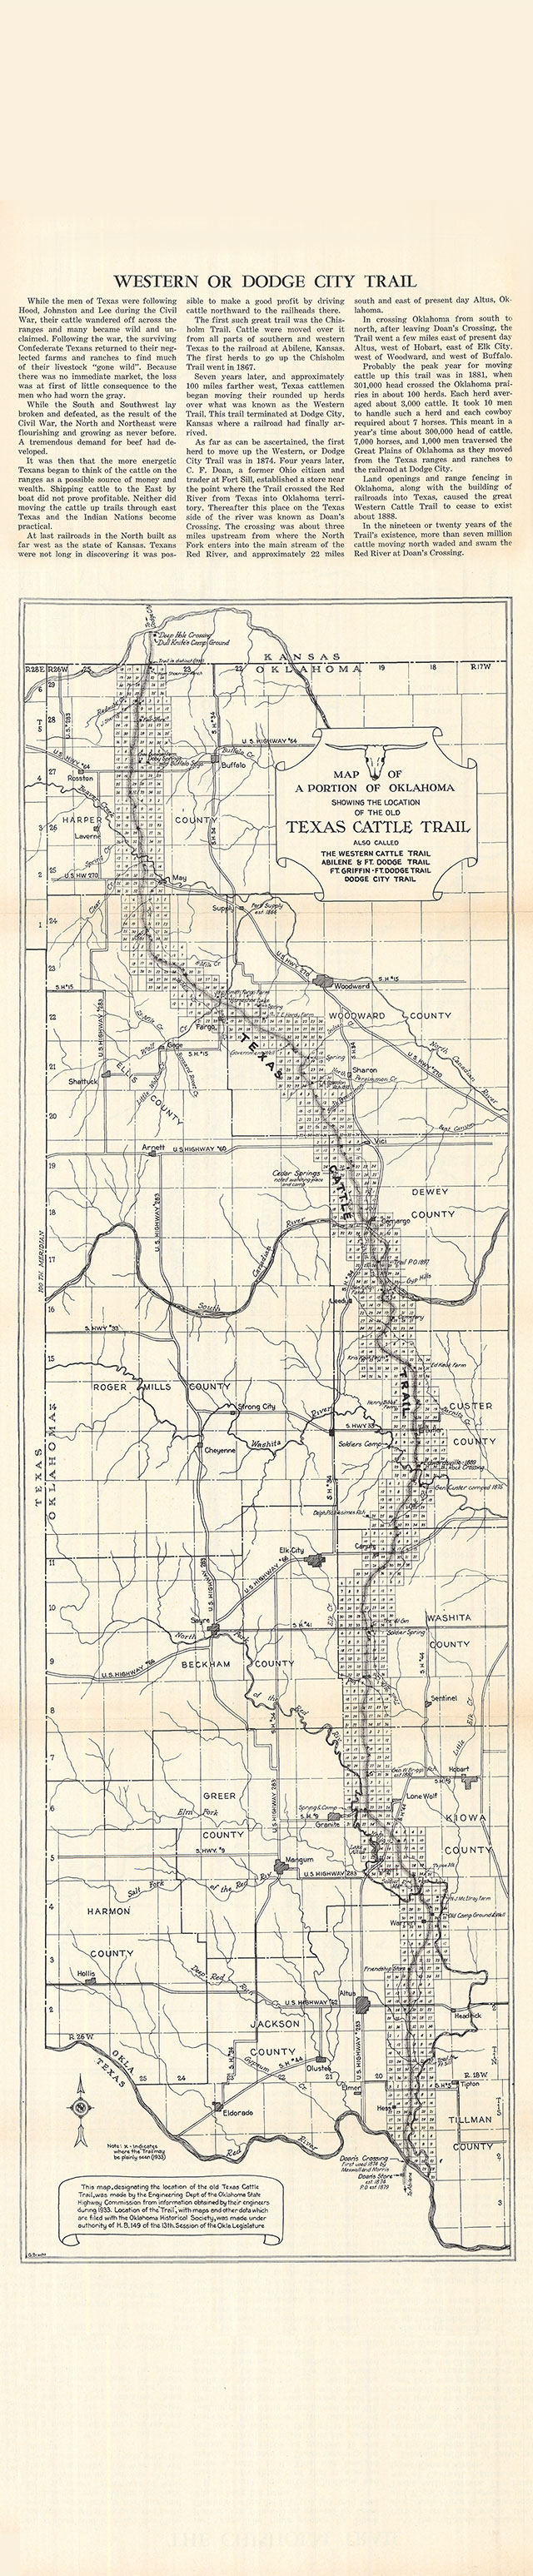 Texas Cattle Trail Map